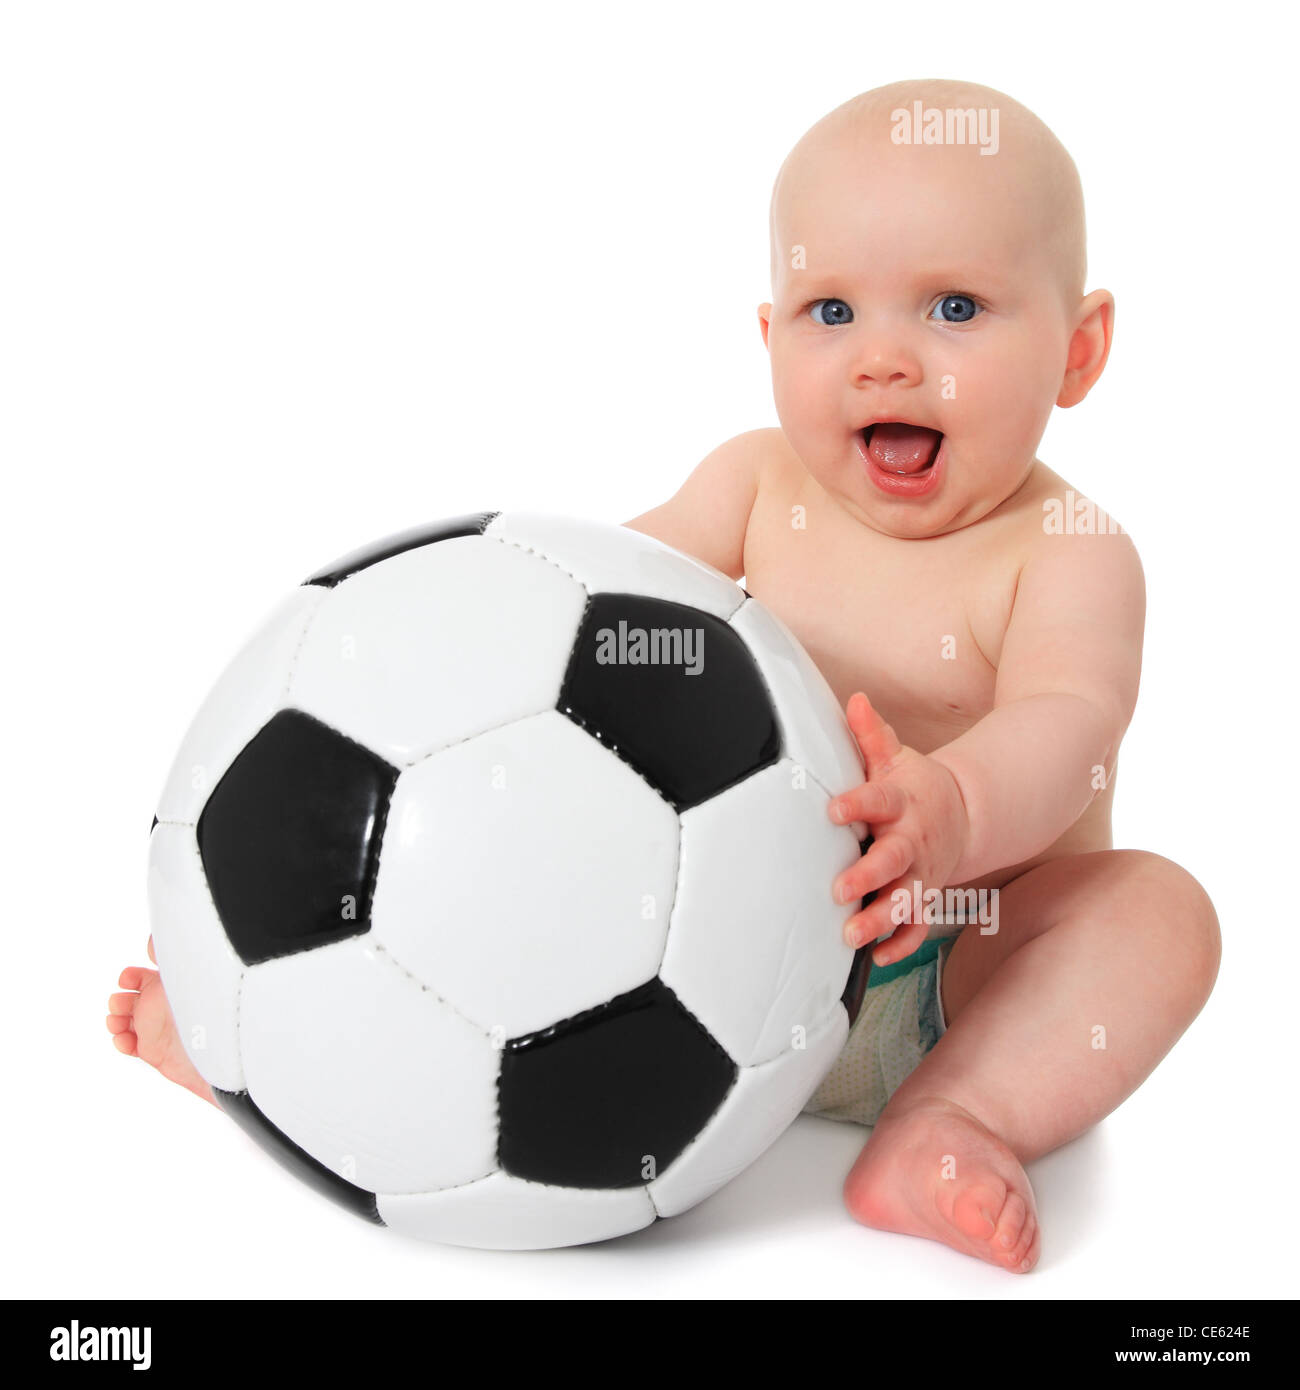 Cute caucasian baby Playing with soccer ball. Le tout sur fond blanc. Banque D'Images